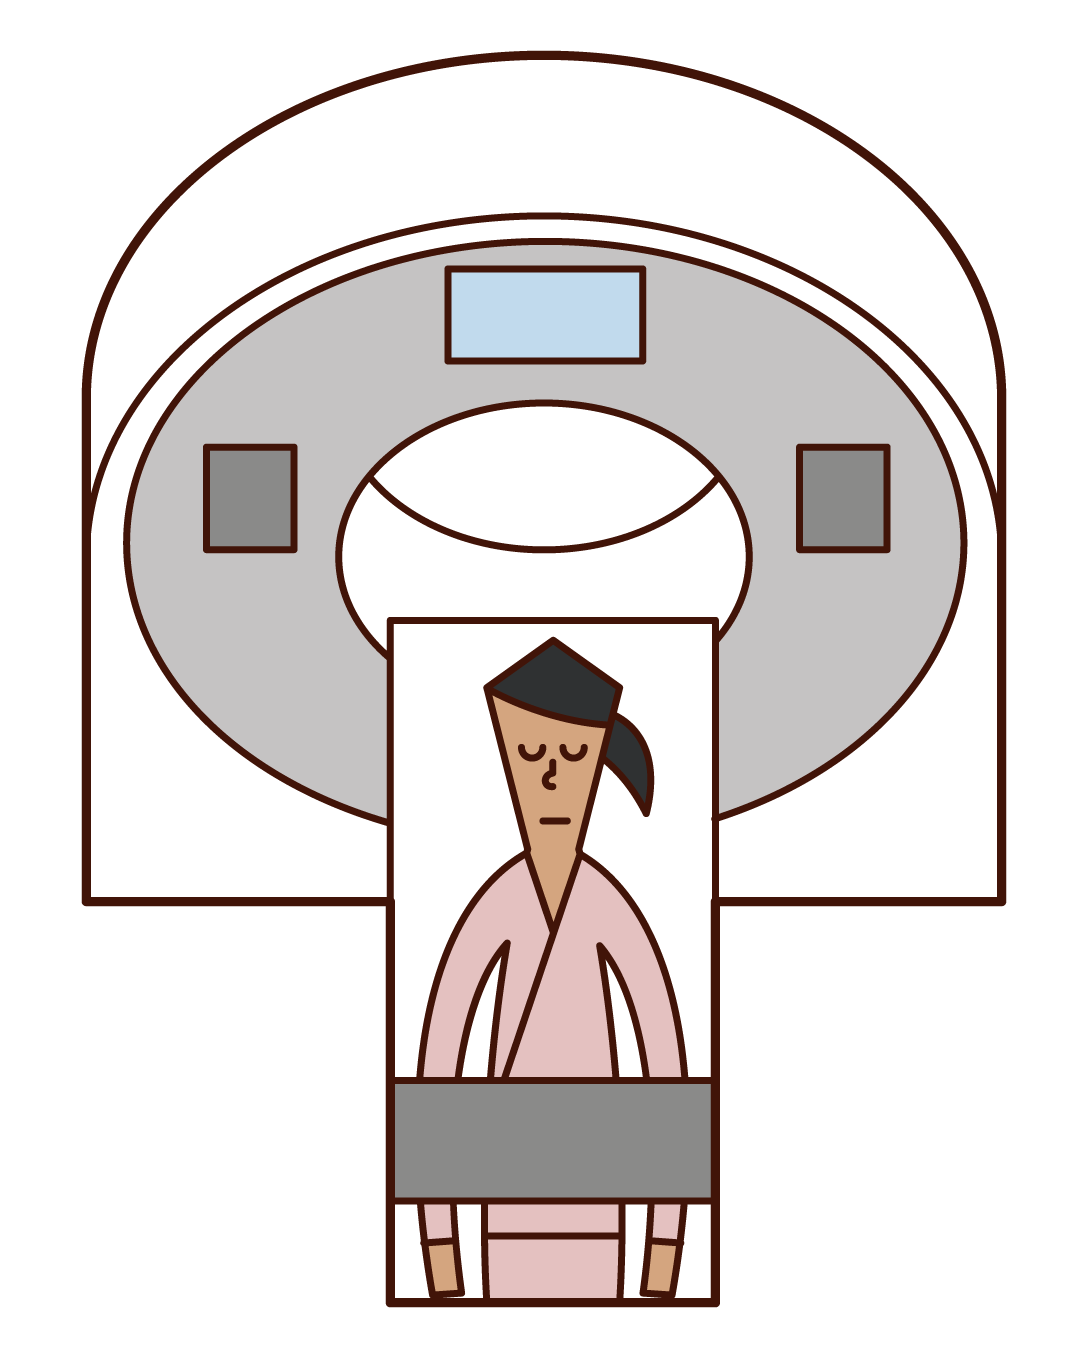 Illustration of a woman undergoing CT and PET tests